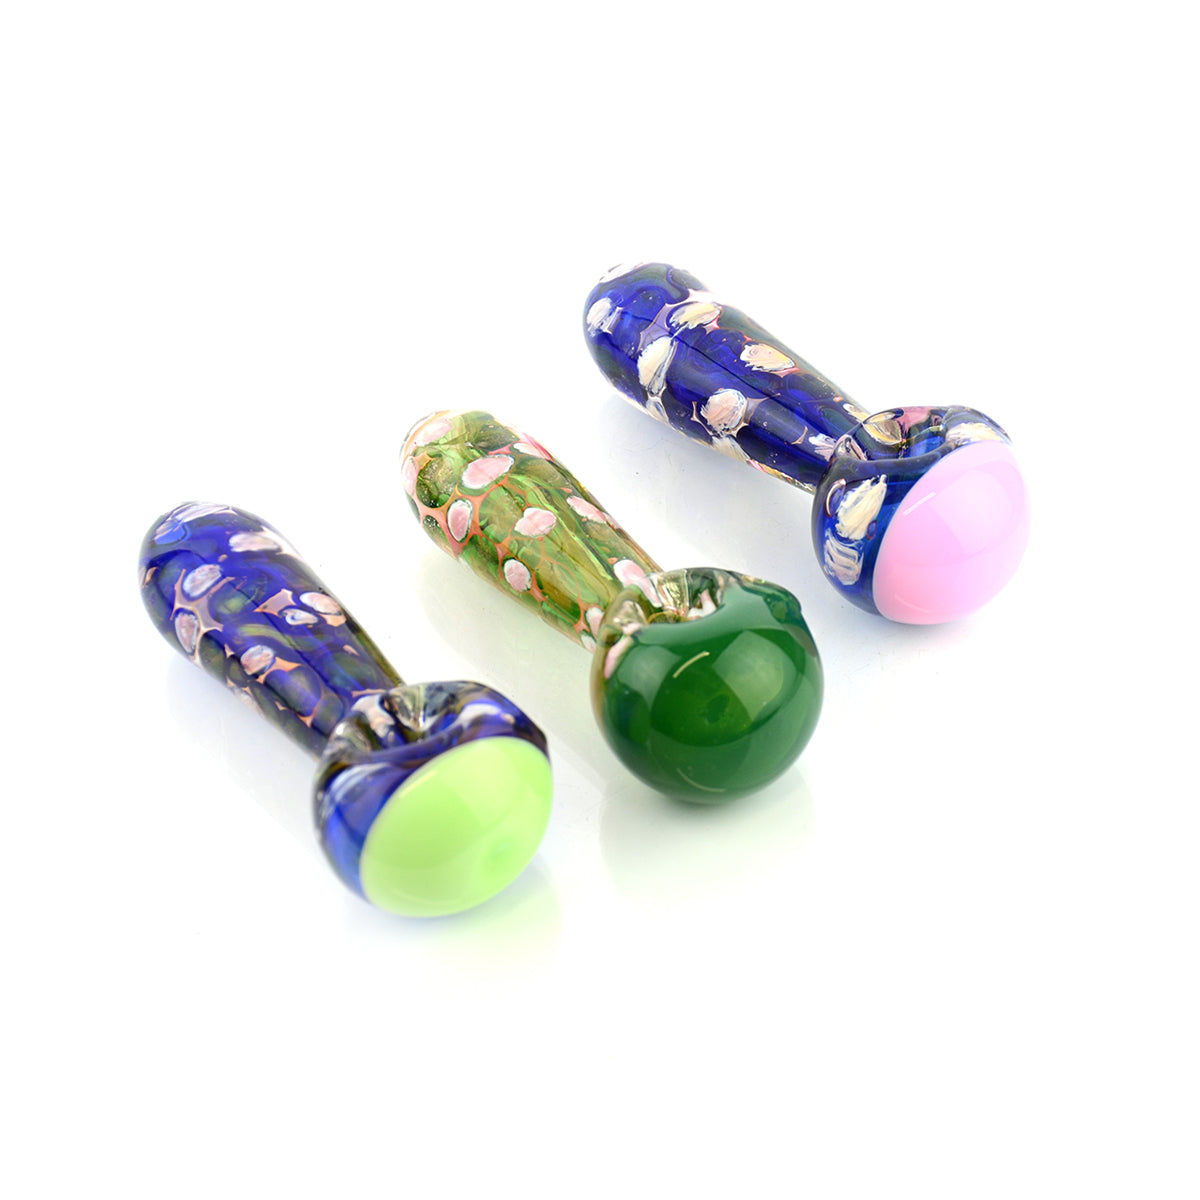 4" Blue Bubbler Strap Hand Pipe With Slime Head